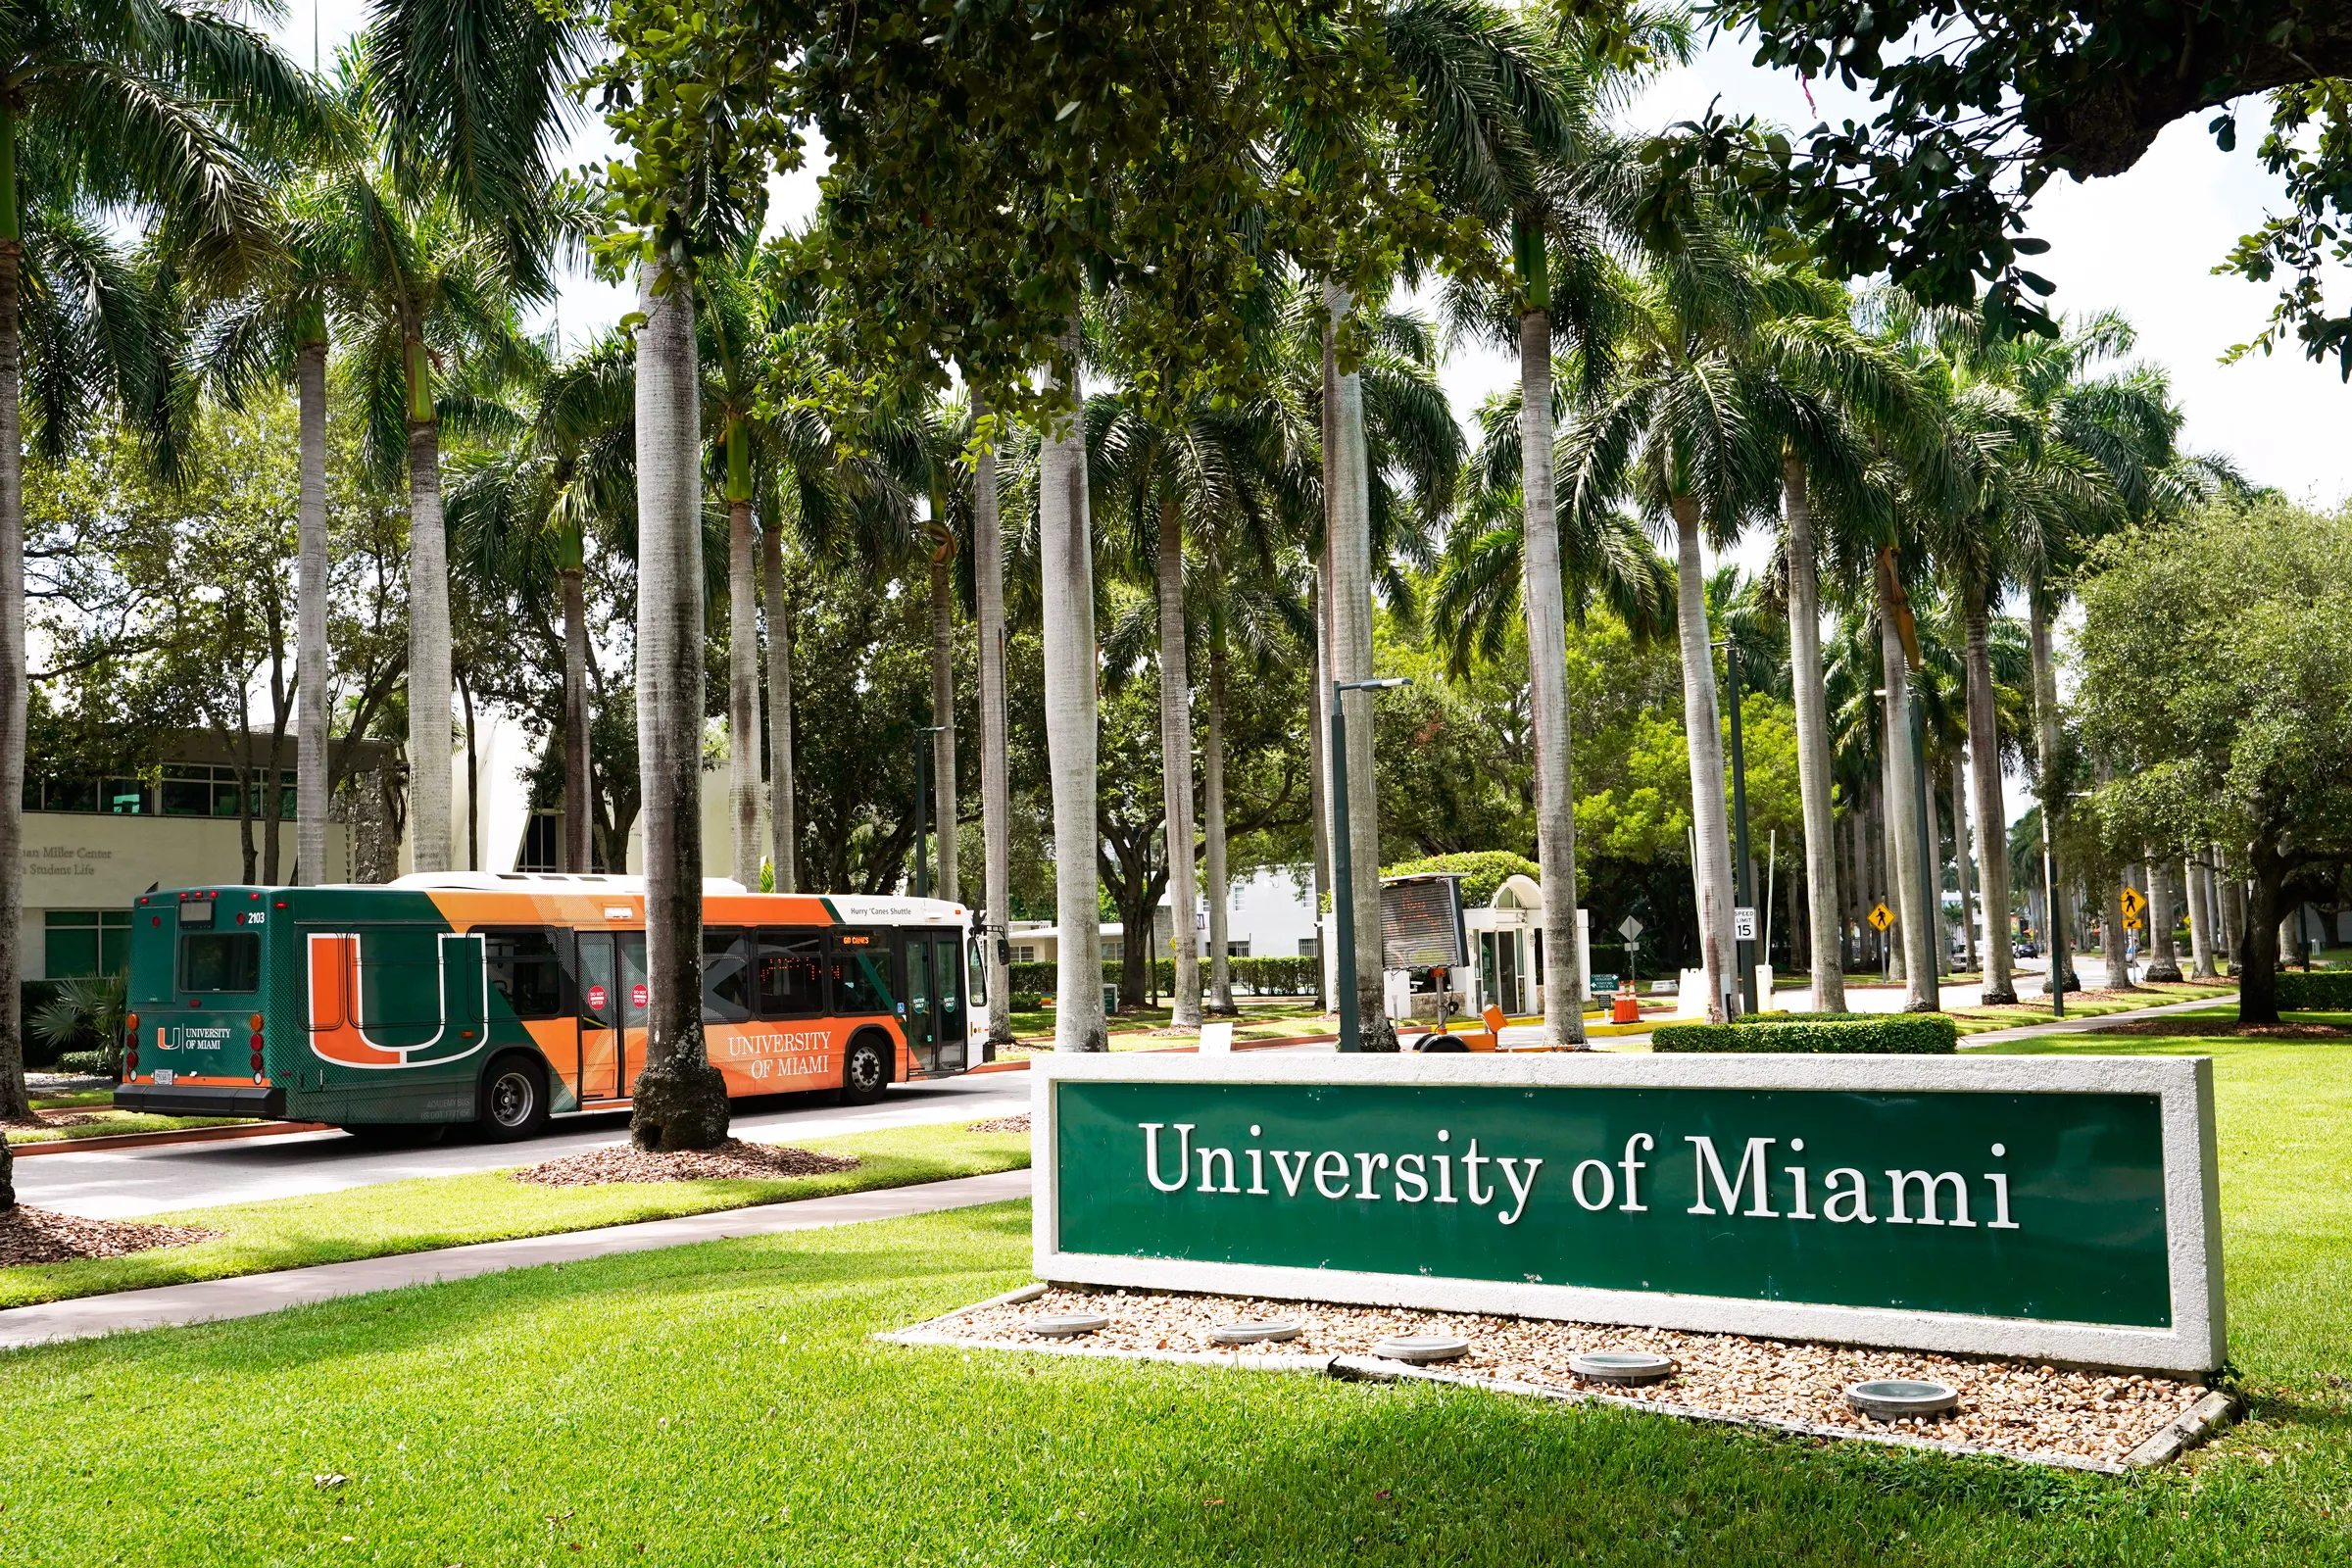 Brief History of the University of Miami